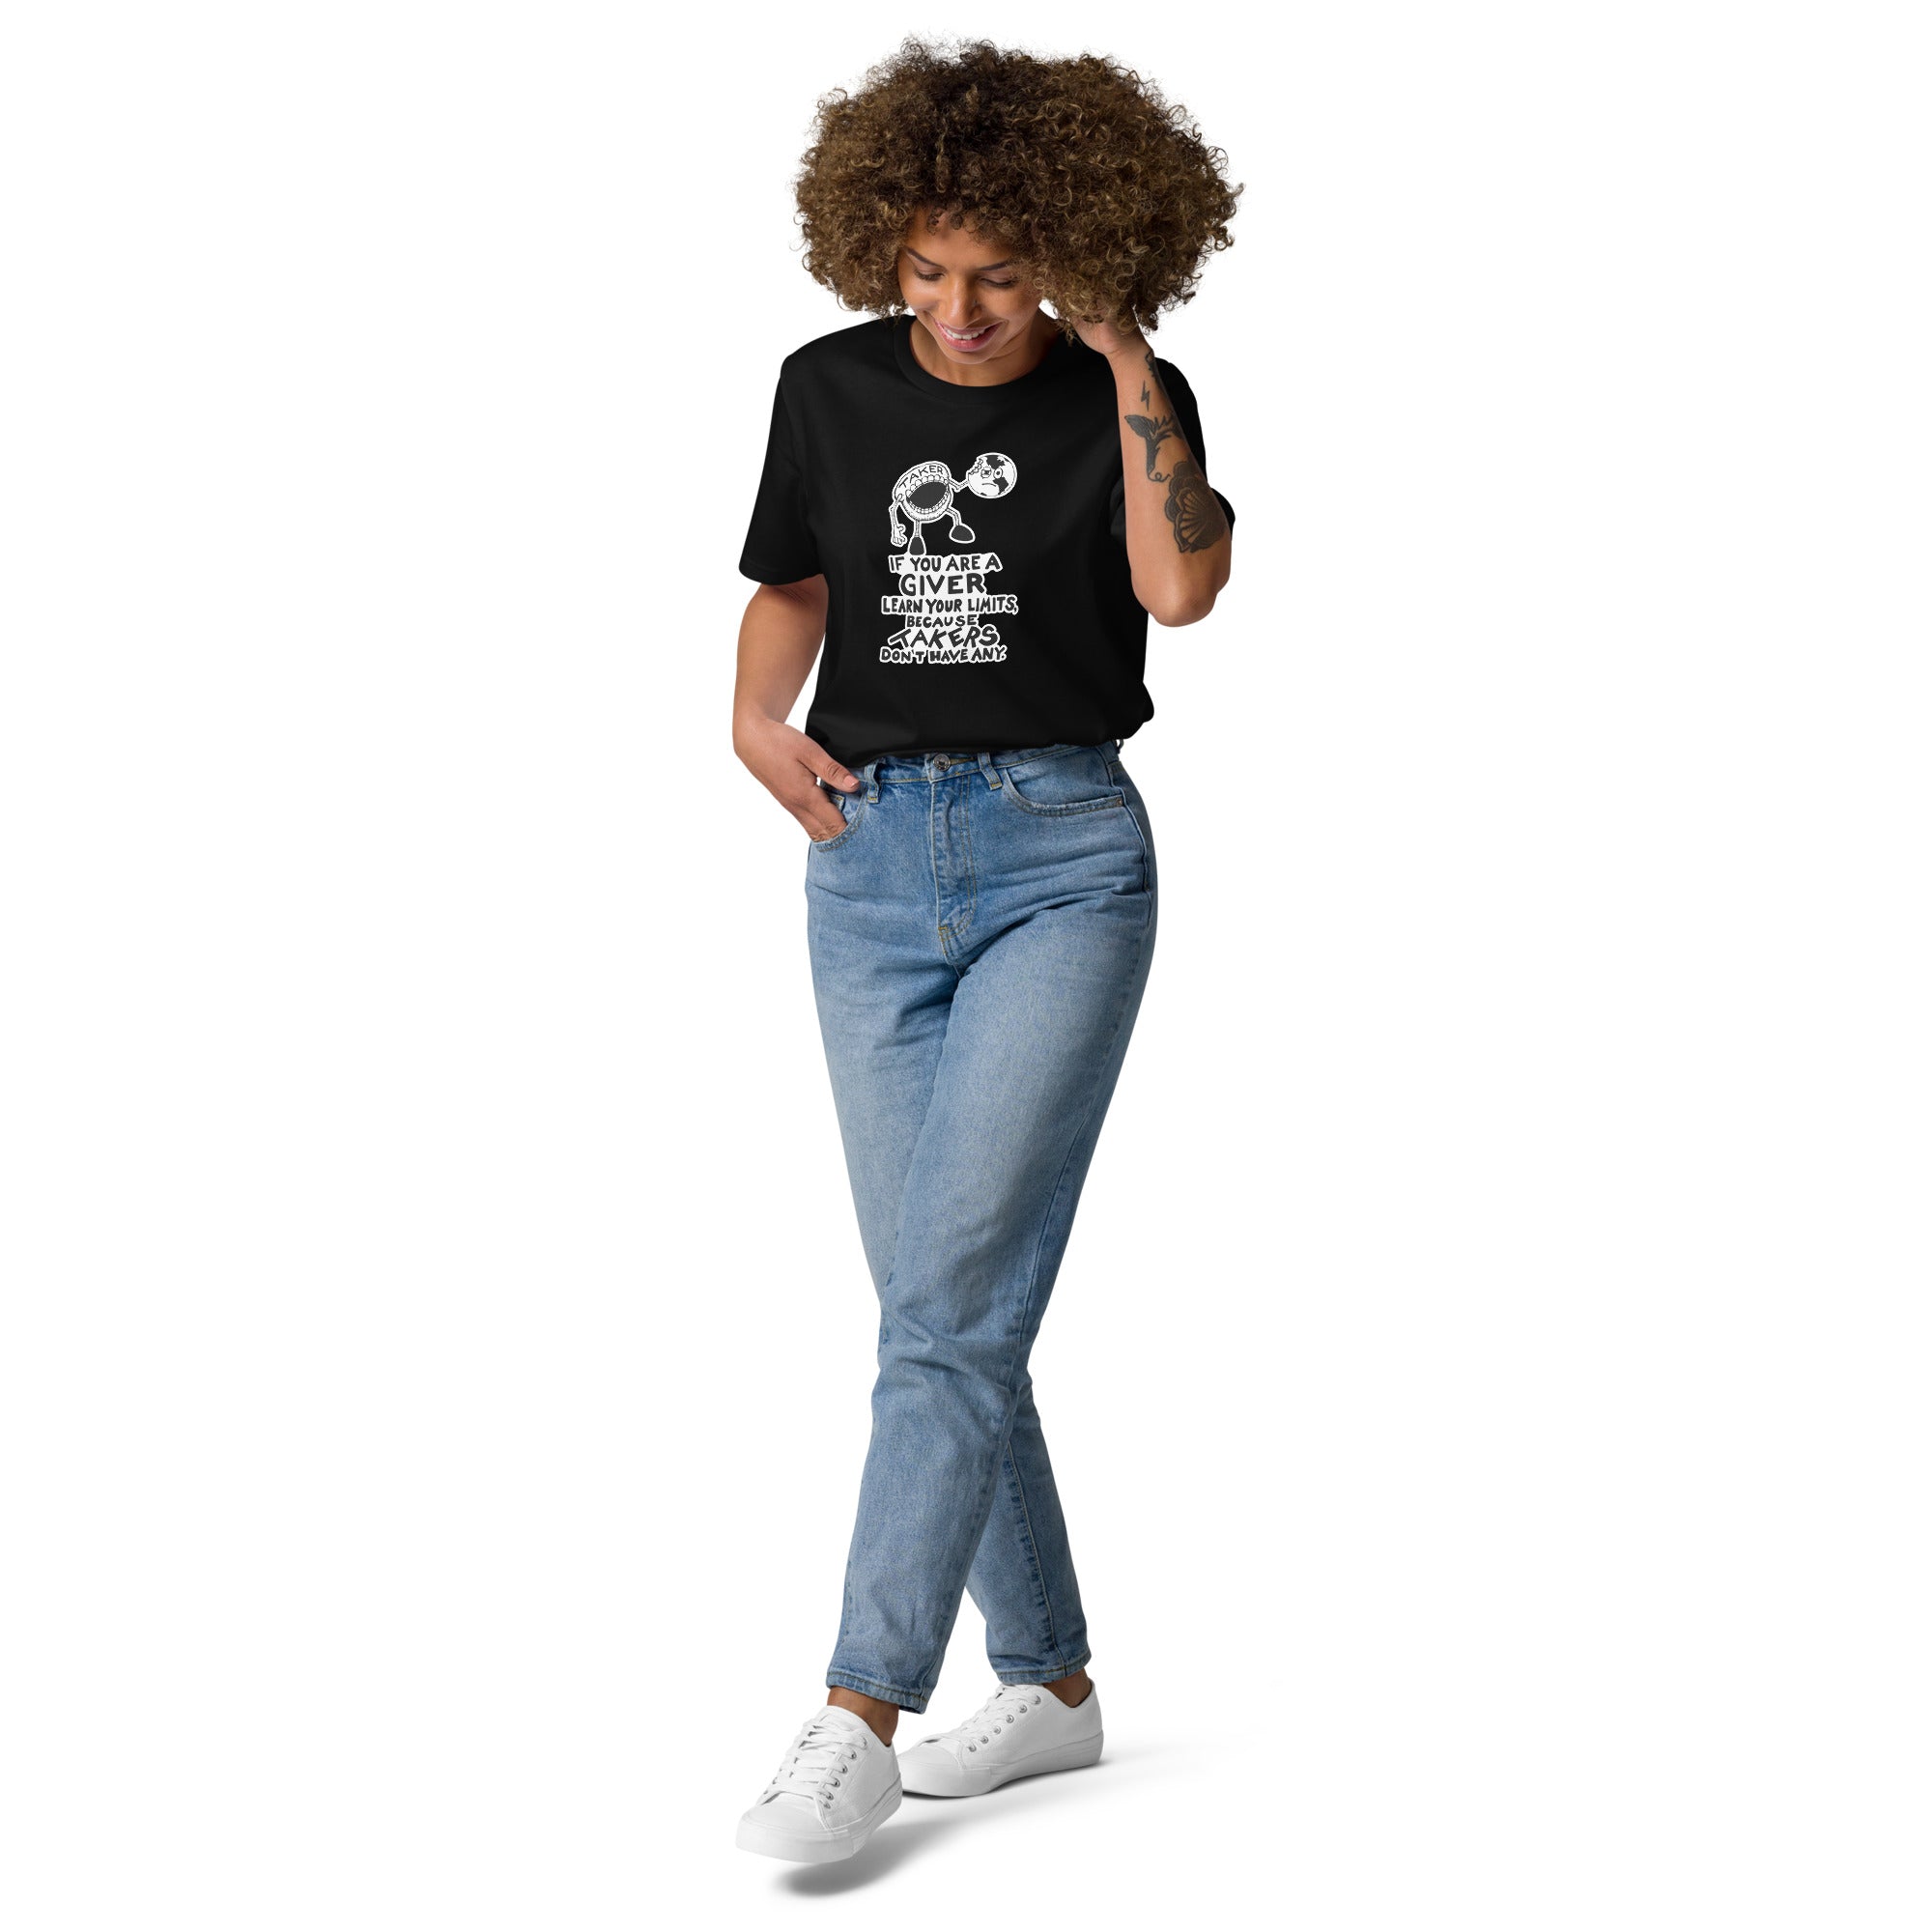 The Taker Organic Cotton Gender Neutral Crew Neck T-Shirt In Black By Artist Rick Frausto